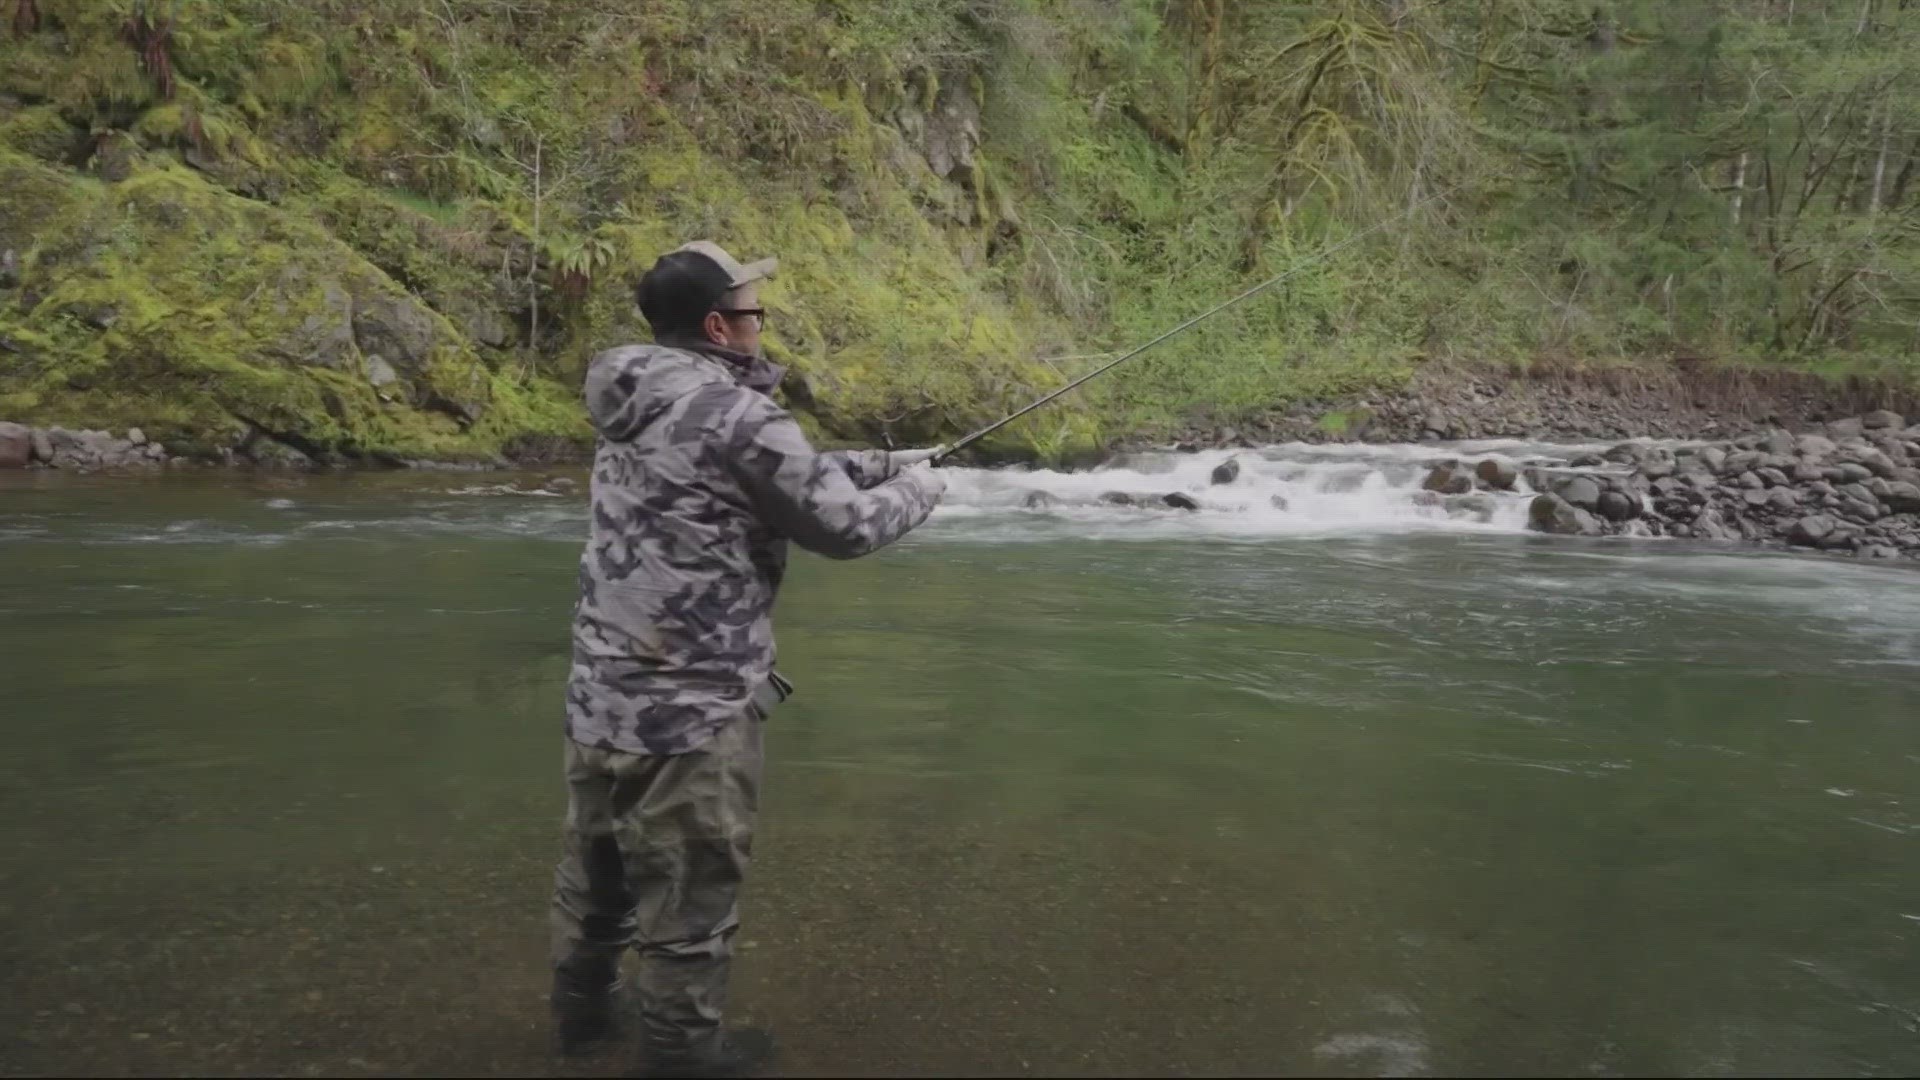 In this week's Getaway, Grant Mcomie joins a refugee from war who explores Oregon rivers with a rod and reel for the chance to discover big fish in new home waters.